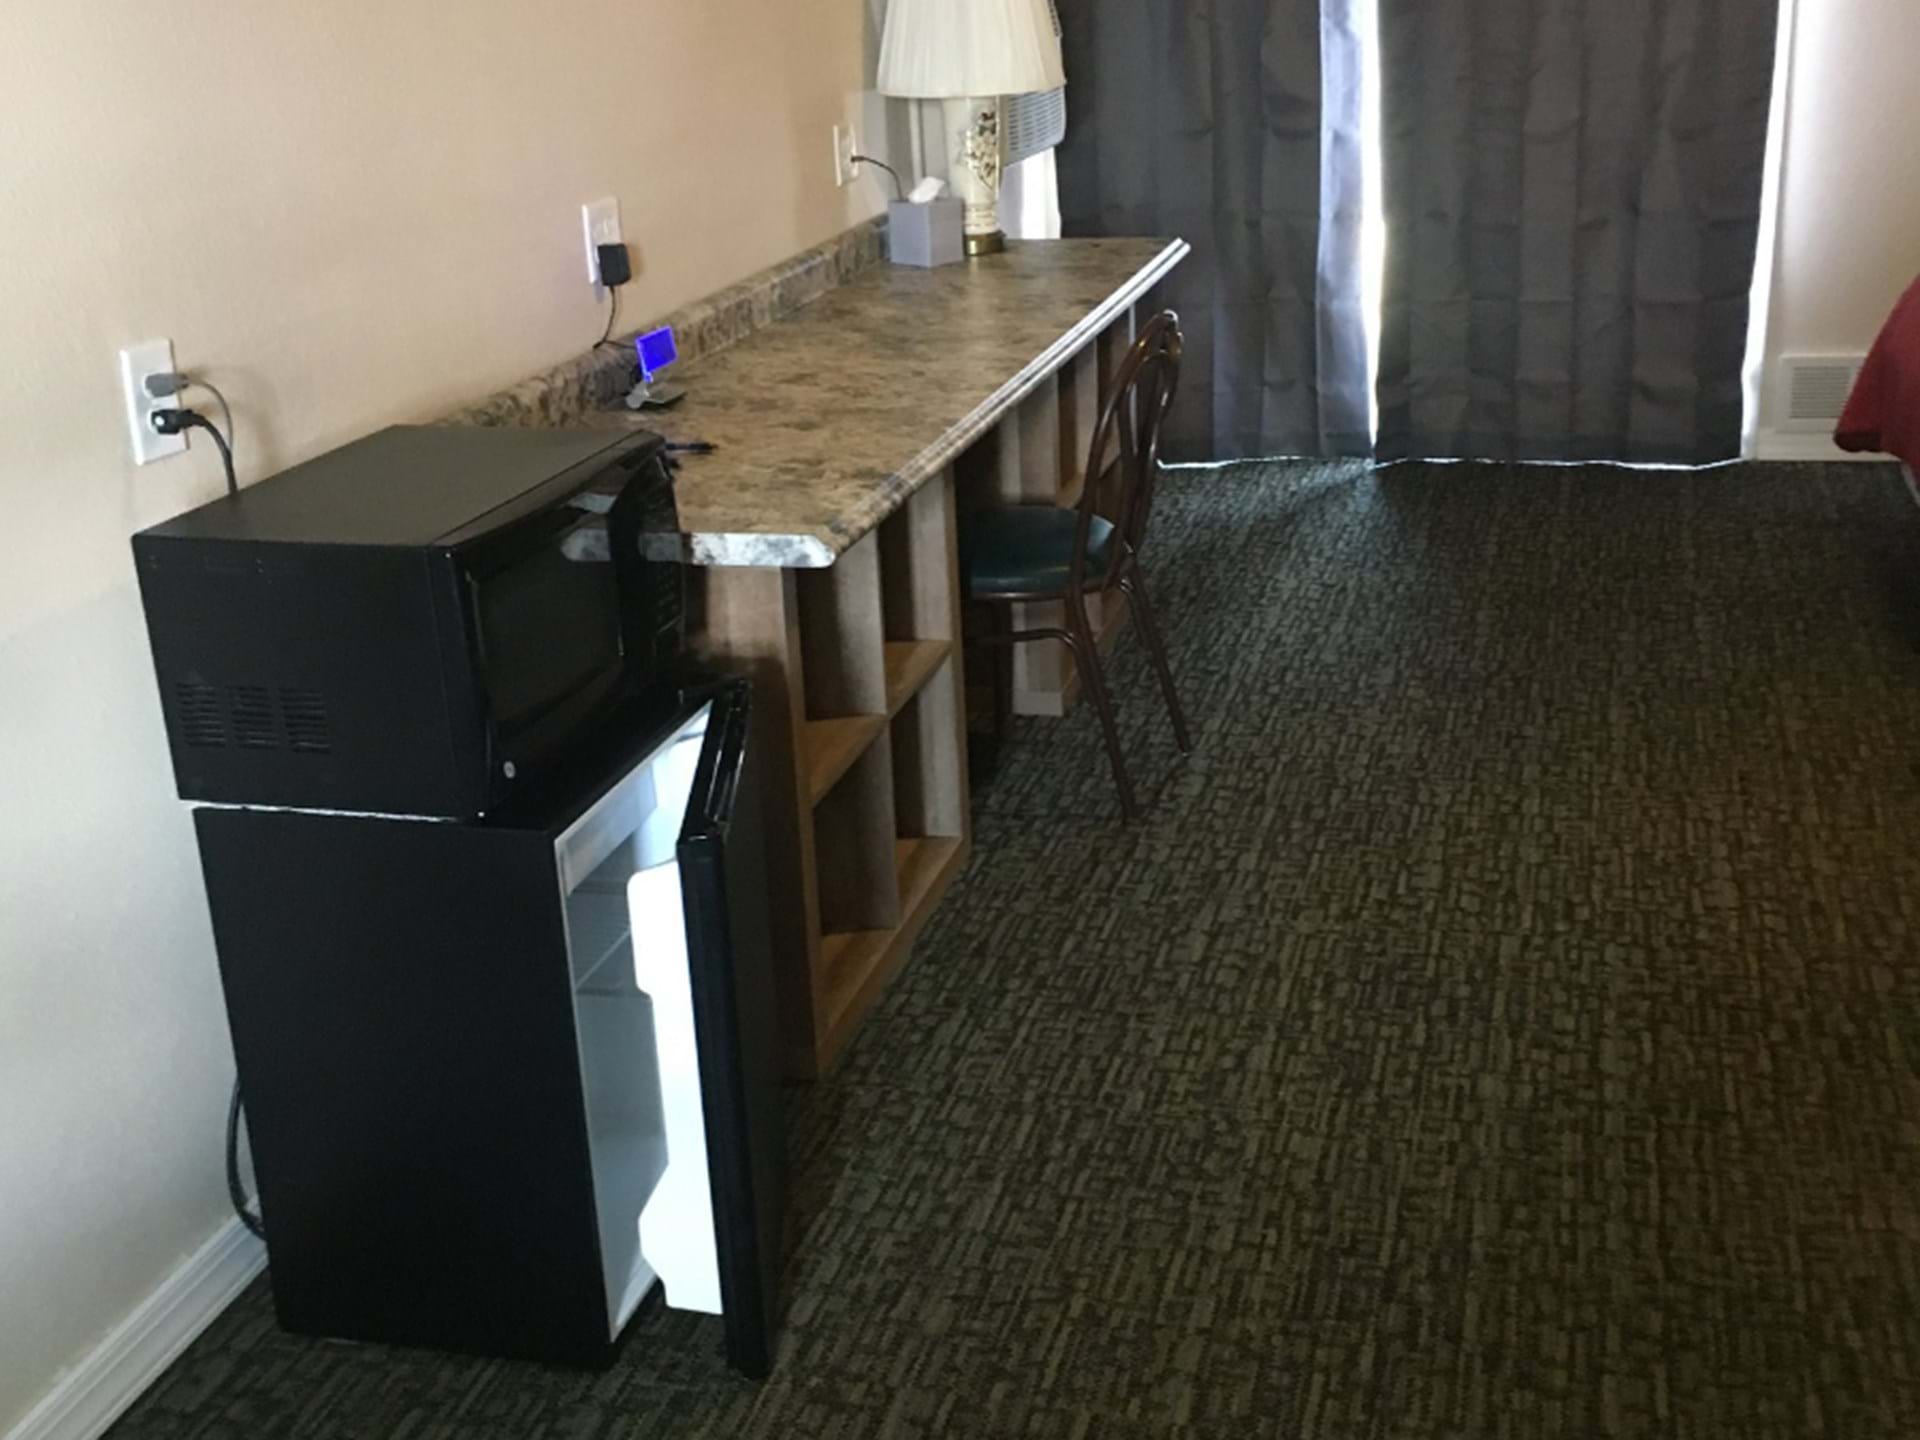 All rooms have a mini fridge and microwave